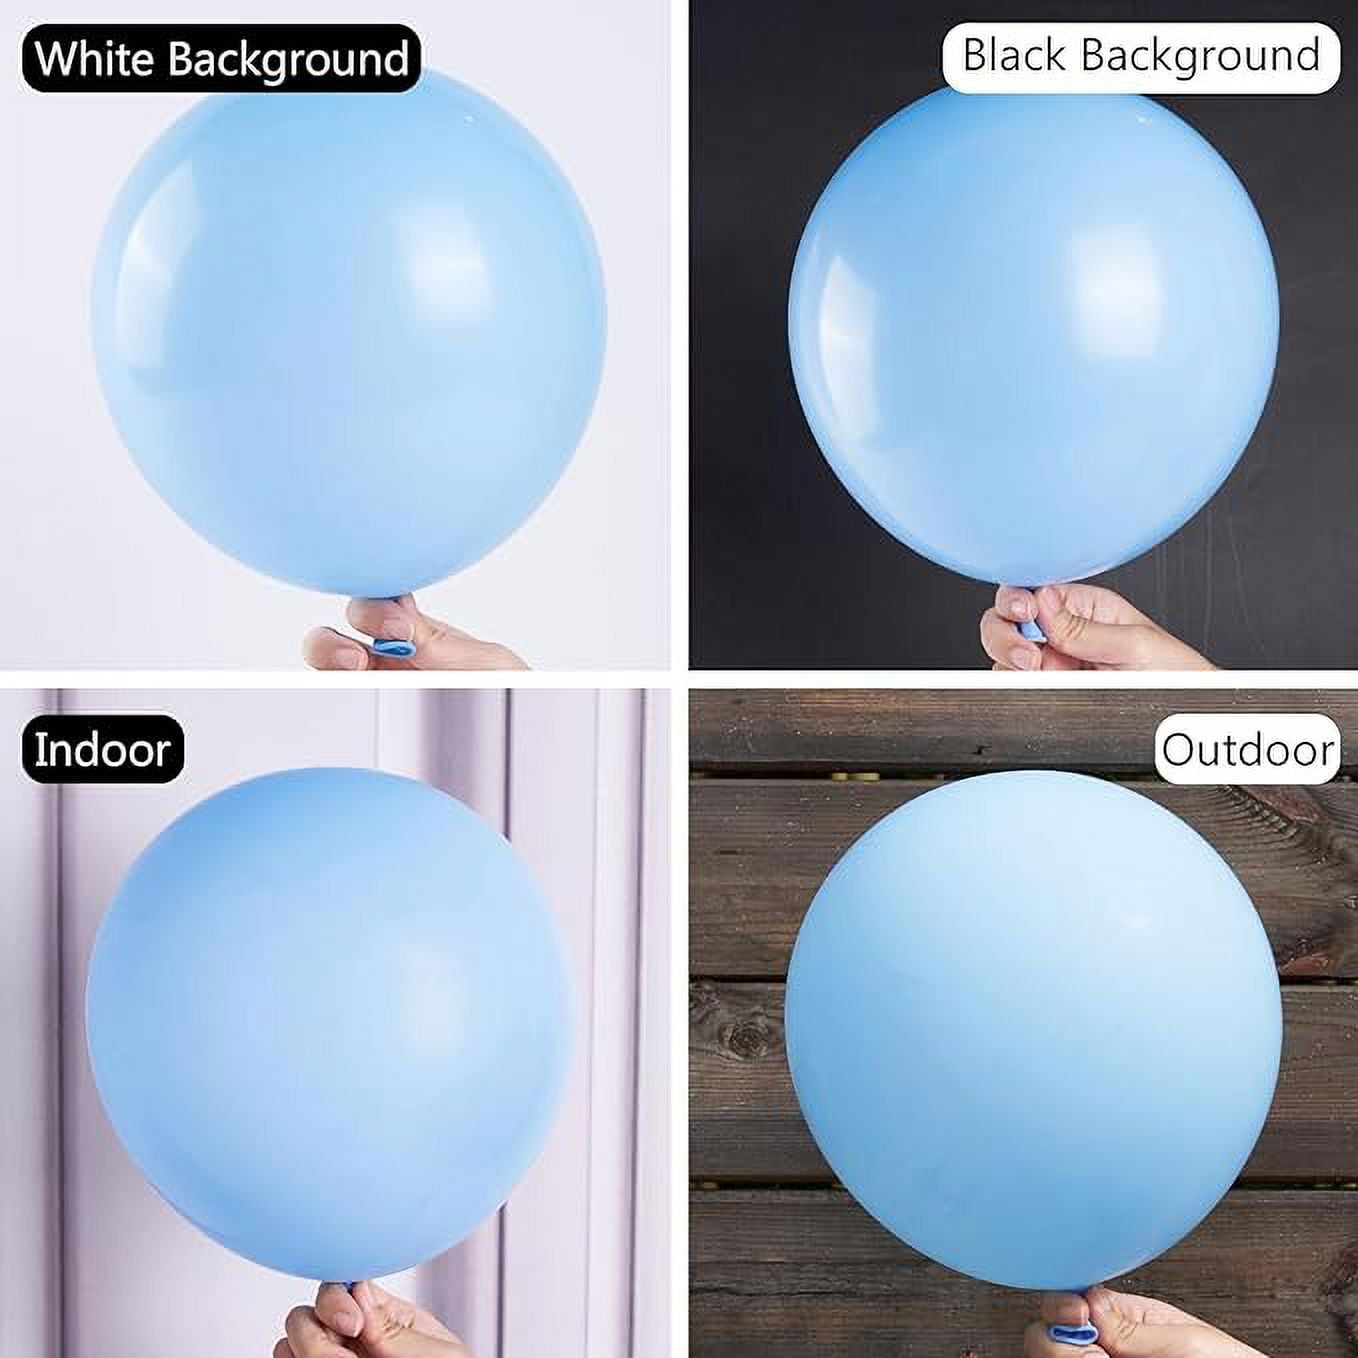 PartyWoo Dusty Blue Balloons, 100 pcs 12 Inch Purplish Boho Blue Balloons,  Slate Blue Balloons for Balloon Garland or Arch as Party Decorations,  Birthday Decorations, Baby Shower Decorations, Blue-F16 - Yahoo Shopping